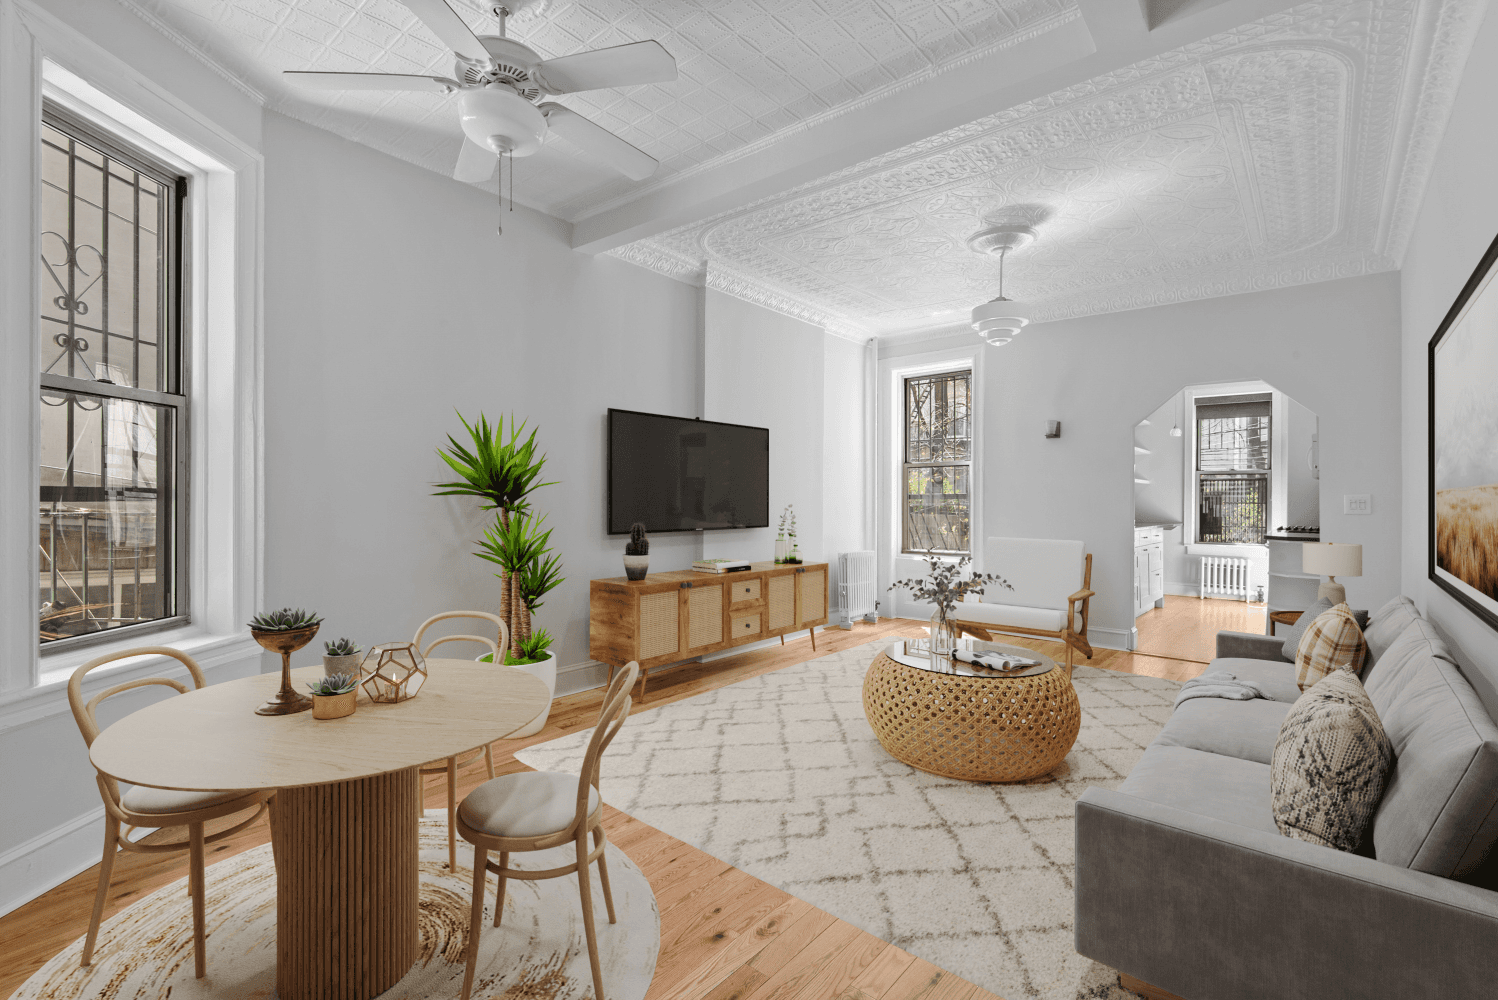 A dreamy Park Slope lifestyle awaits in this renovated pre war rental boasting charming original details, modern upgrades, and a flexible 2 bedroom, 1 bathroom layout with dedicated home office ...